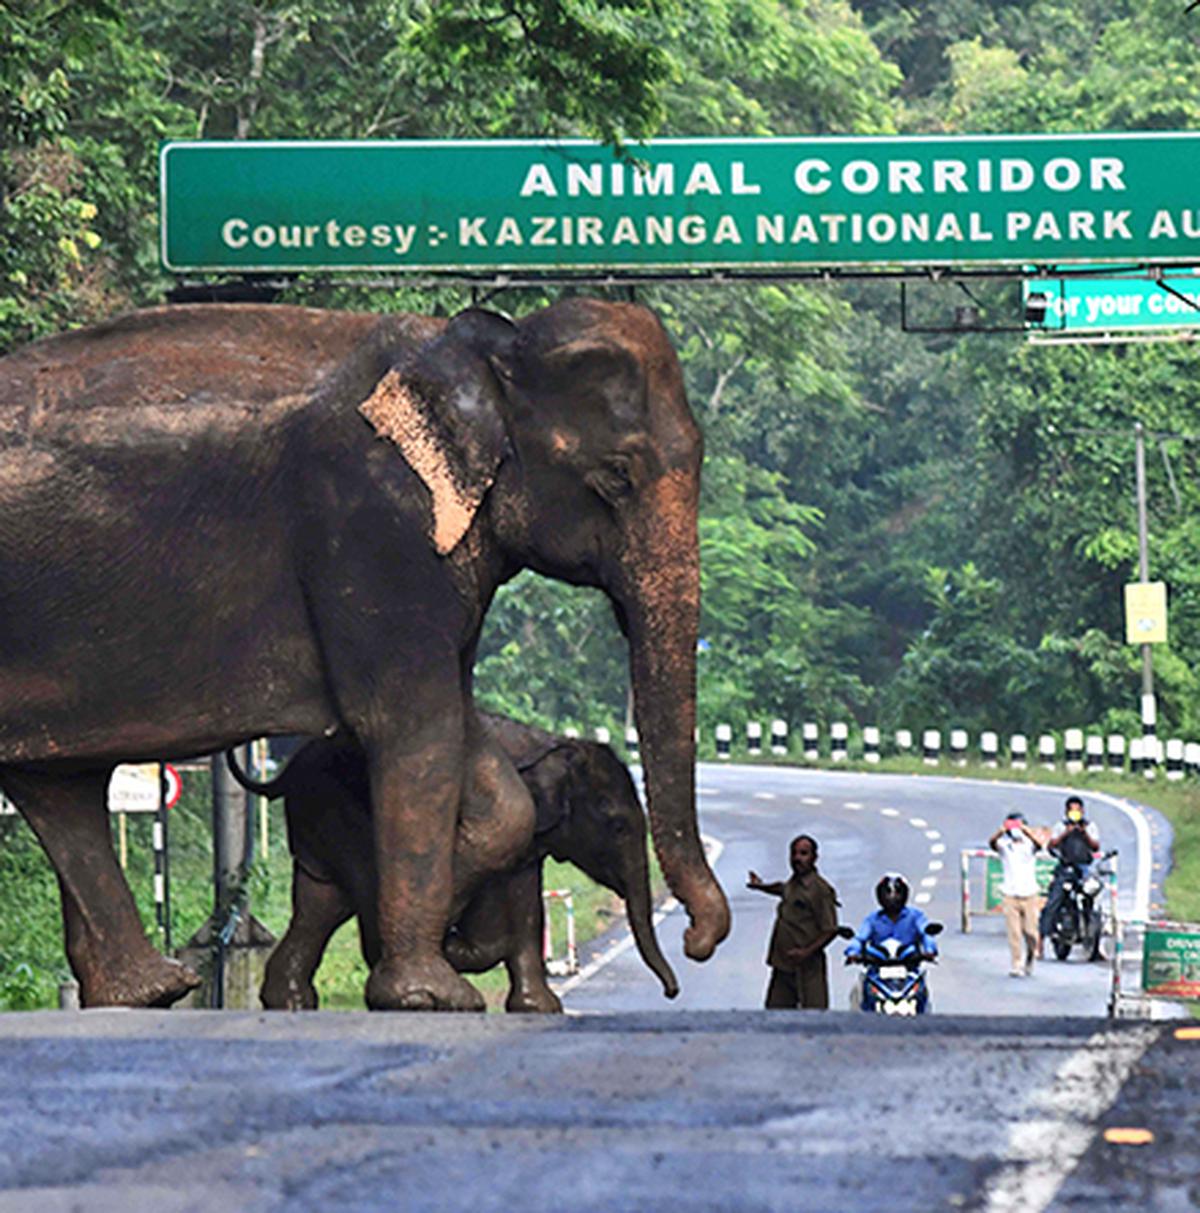 A wild elephant and a calf cross a National Highway at the Kaziranga National Park in India’s northeast state of Assam